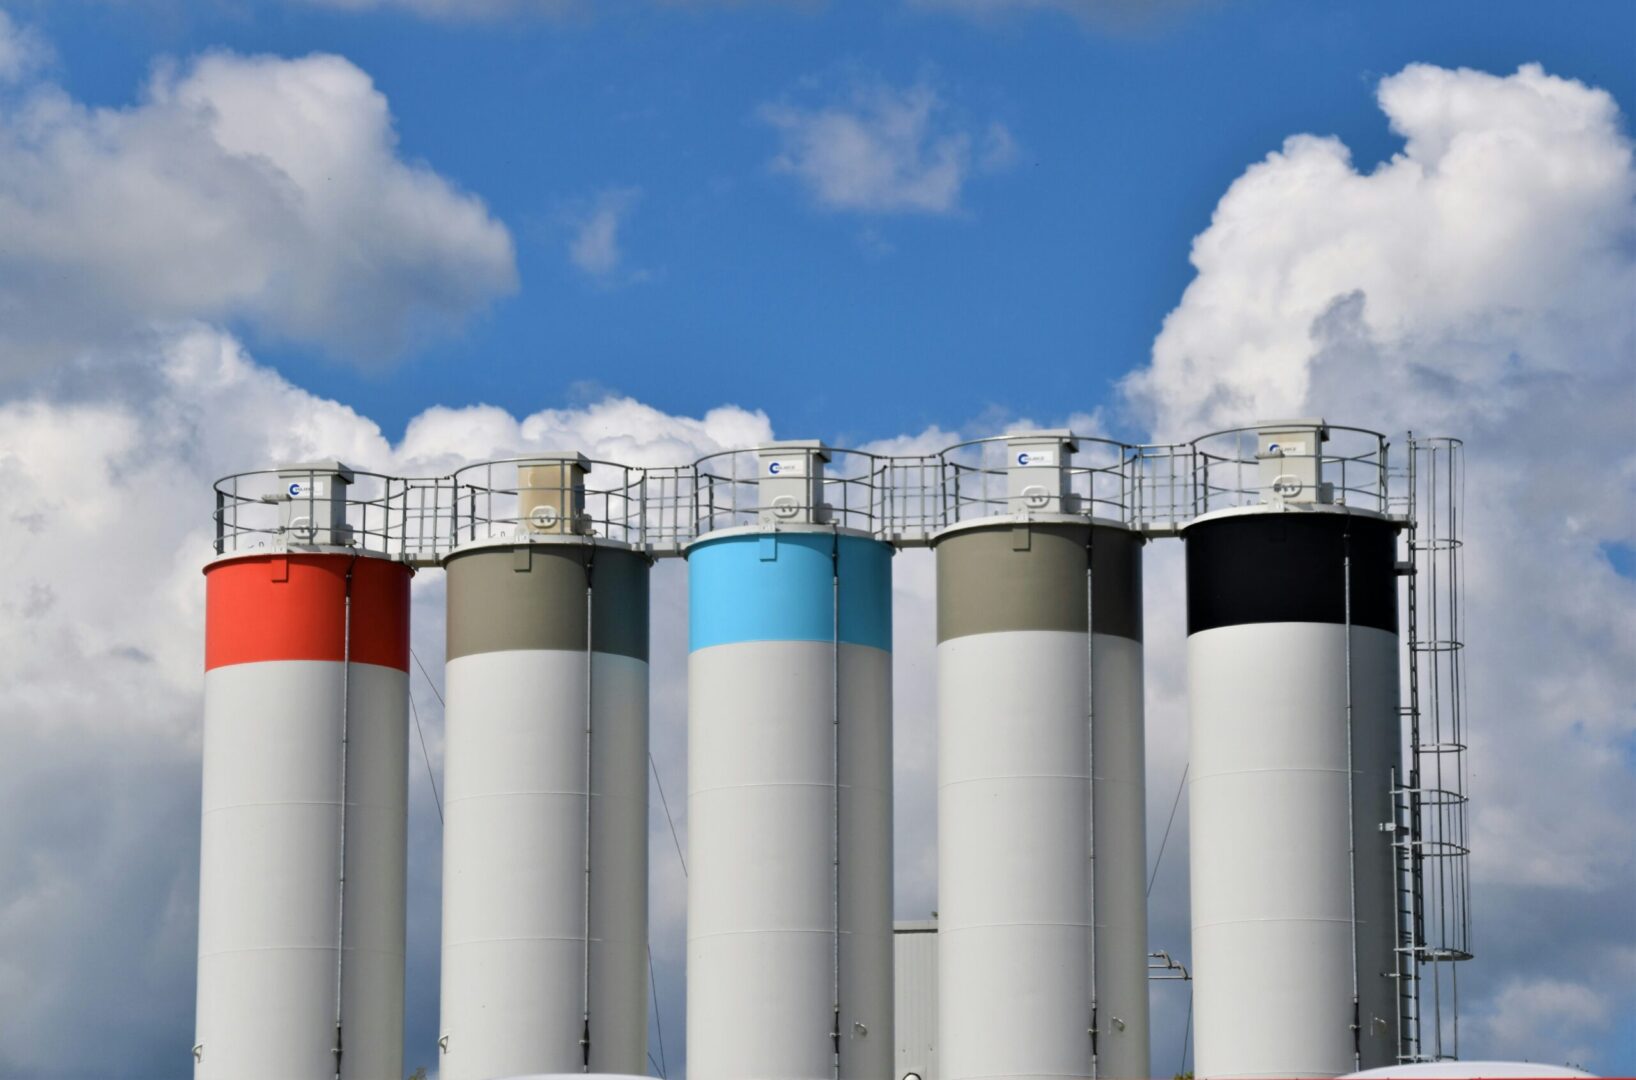 A group of white, blue, and red silos against a blue sky.